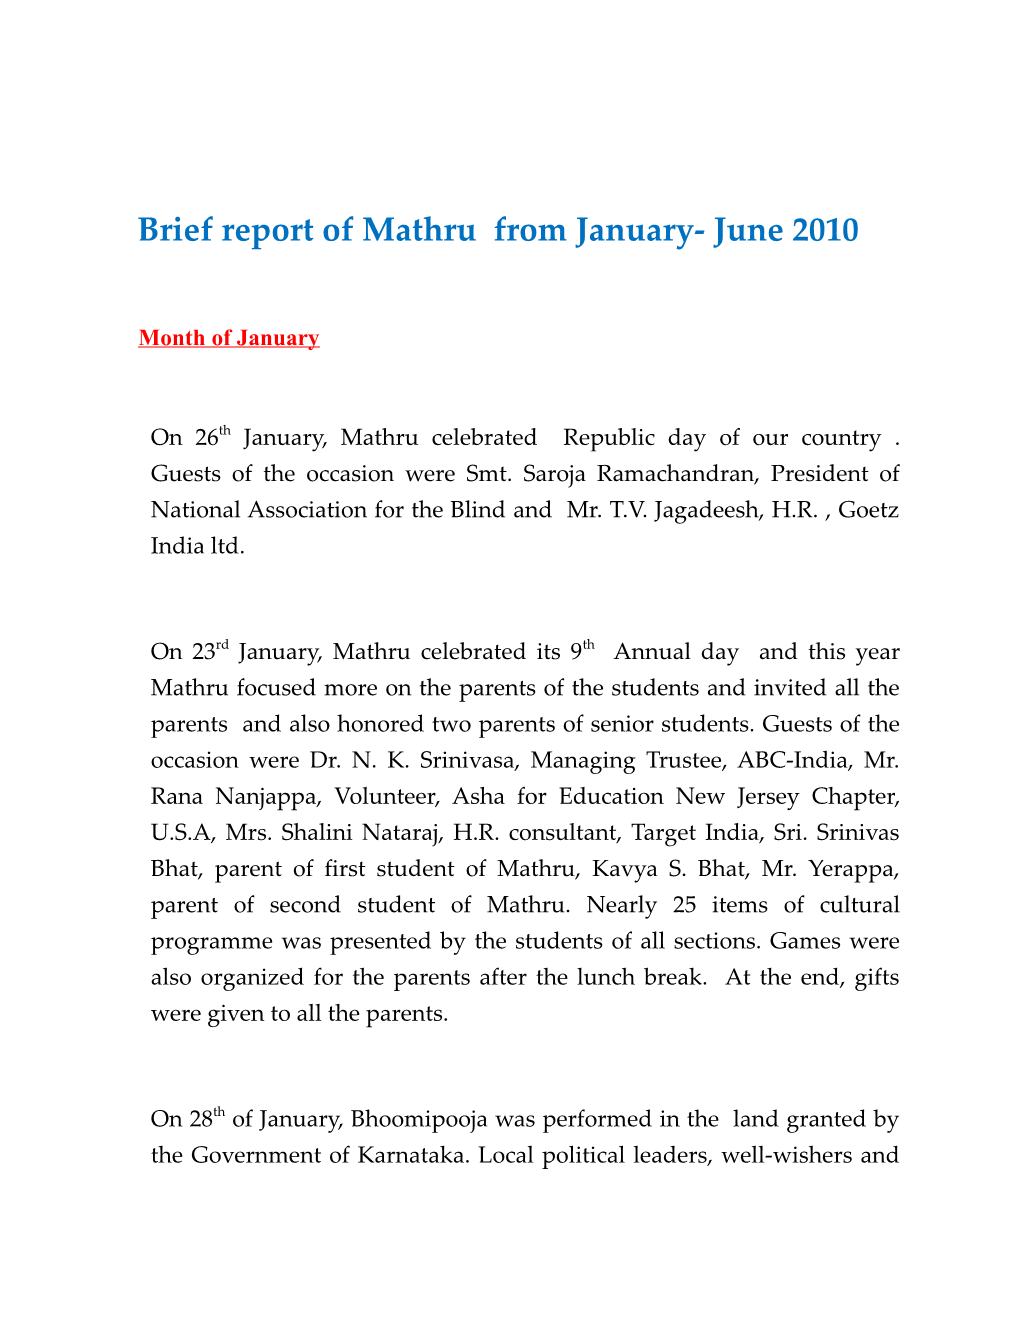 Brief Report of Mathru from January- June 2010